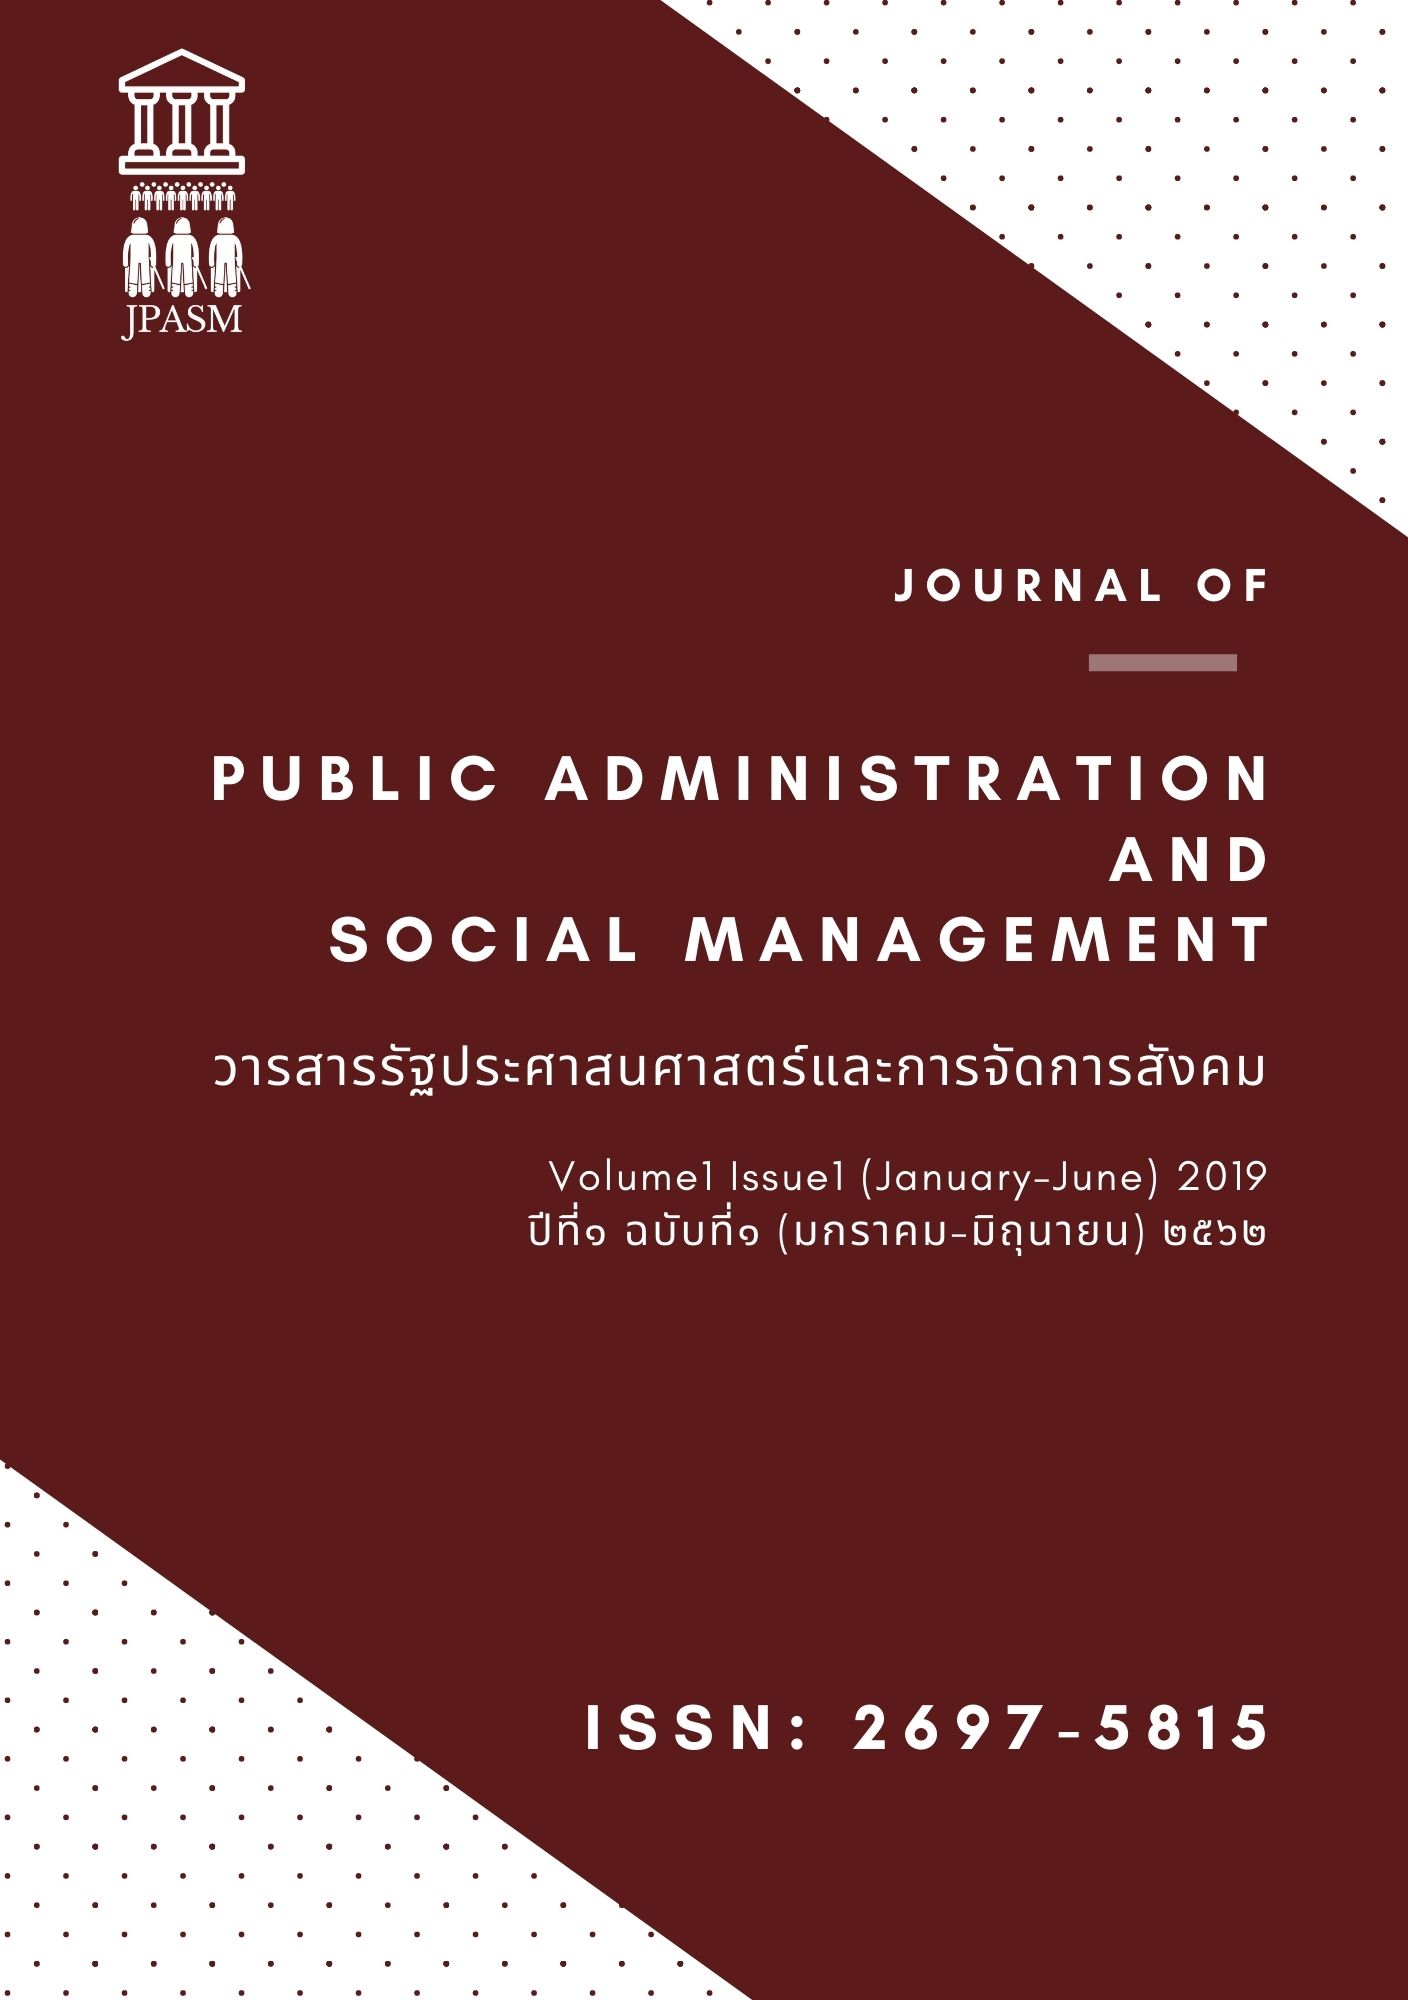 					View Vol. 1 No. 1 (2019): Journal of Public Administration and Social Management
				